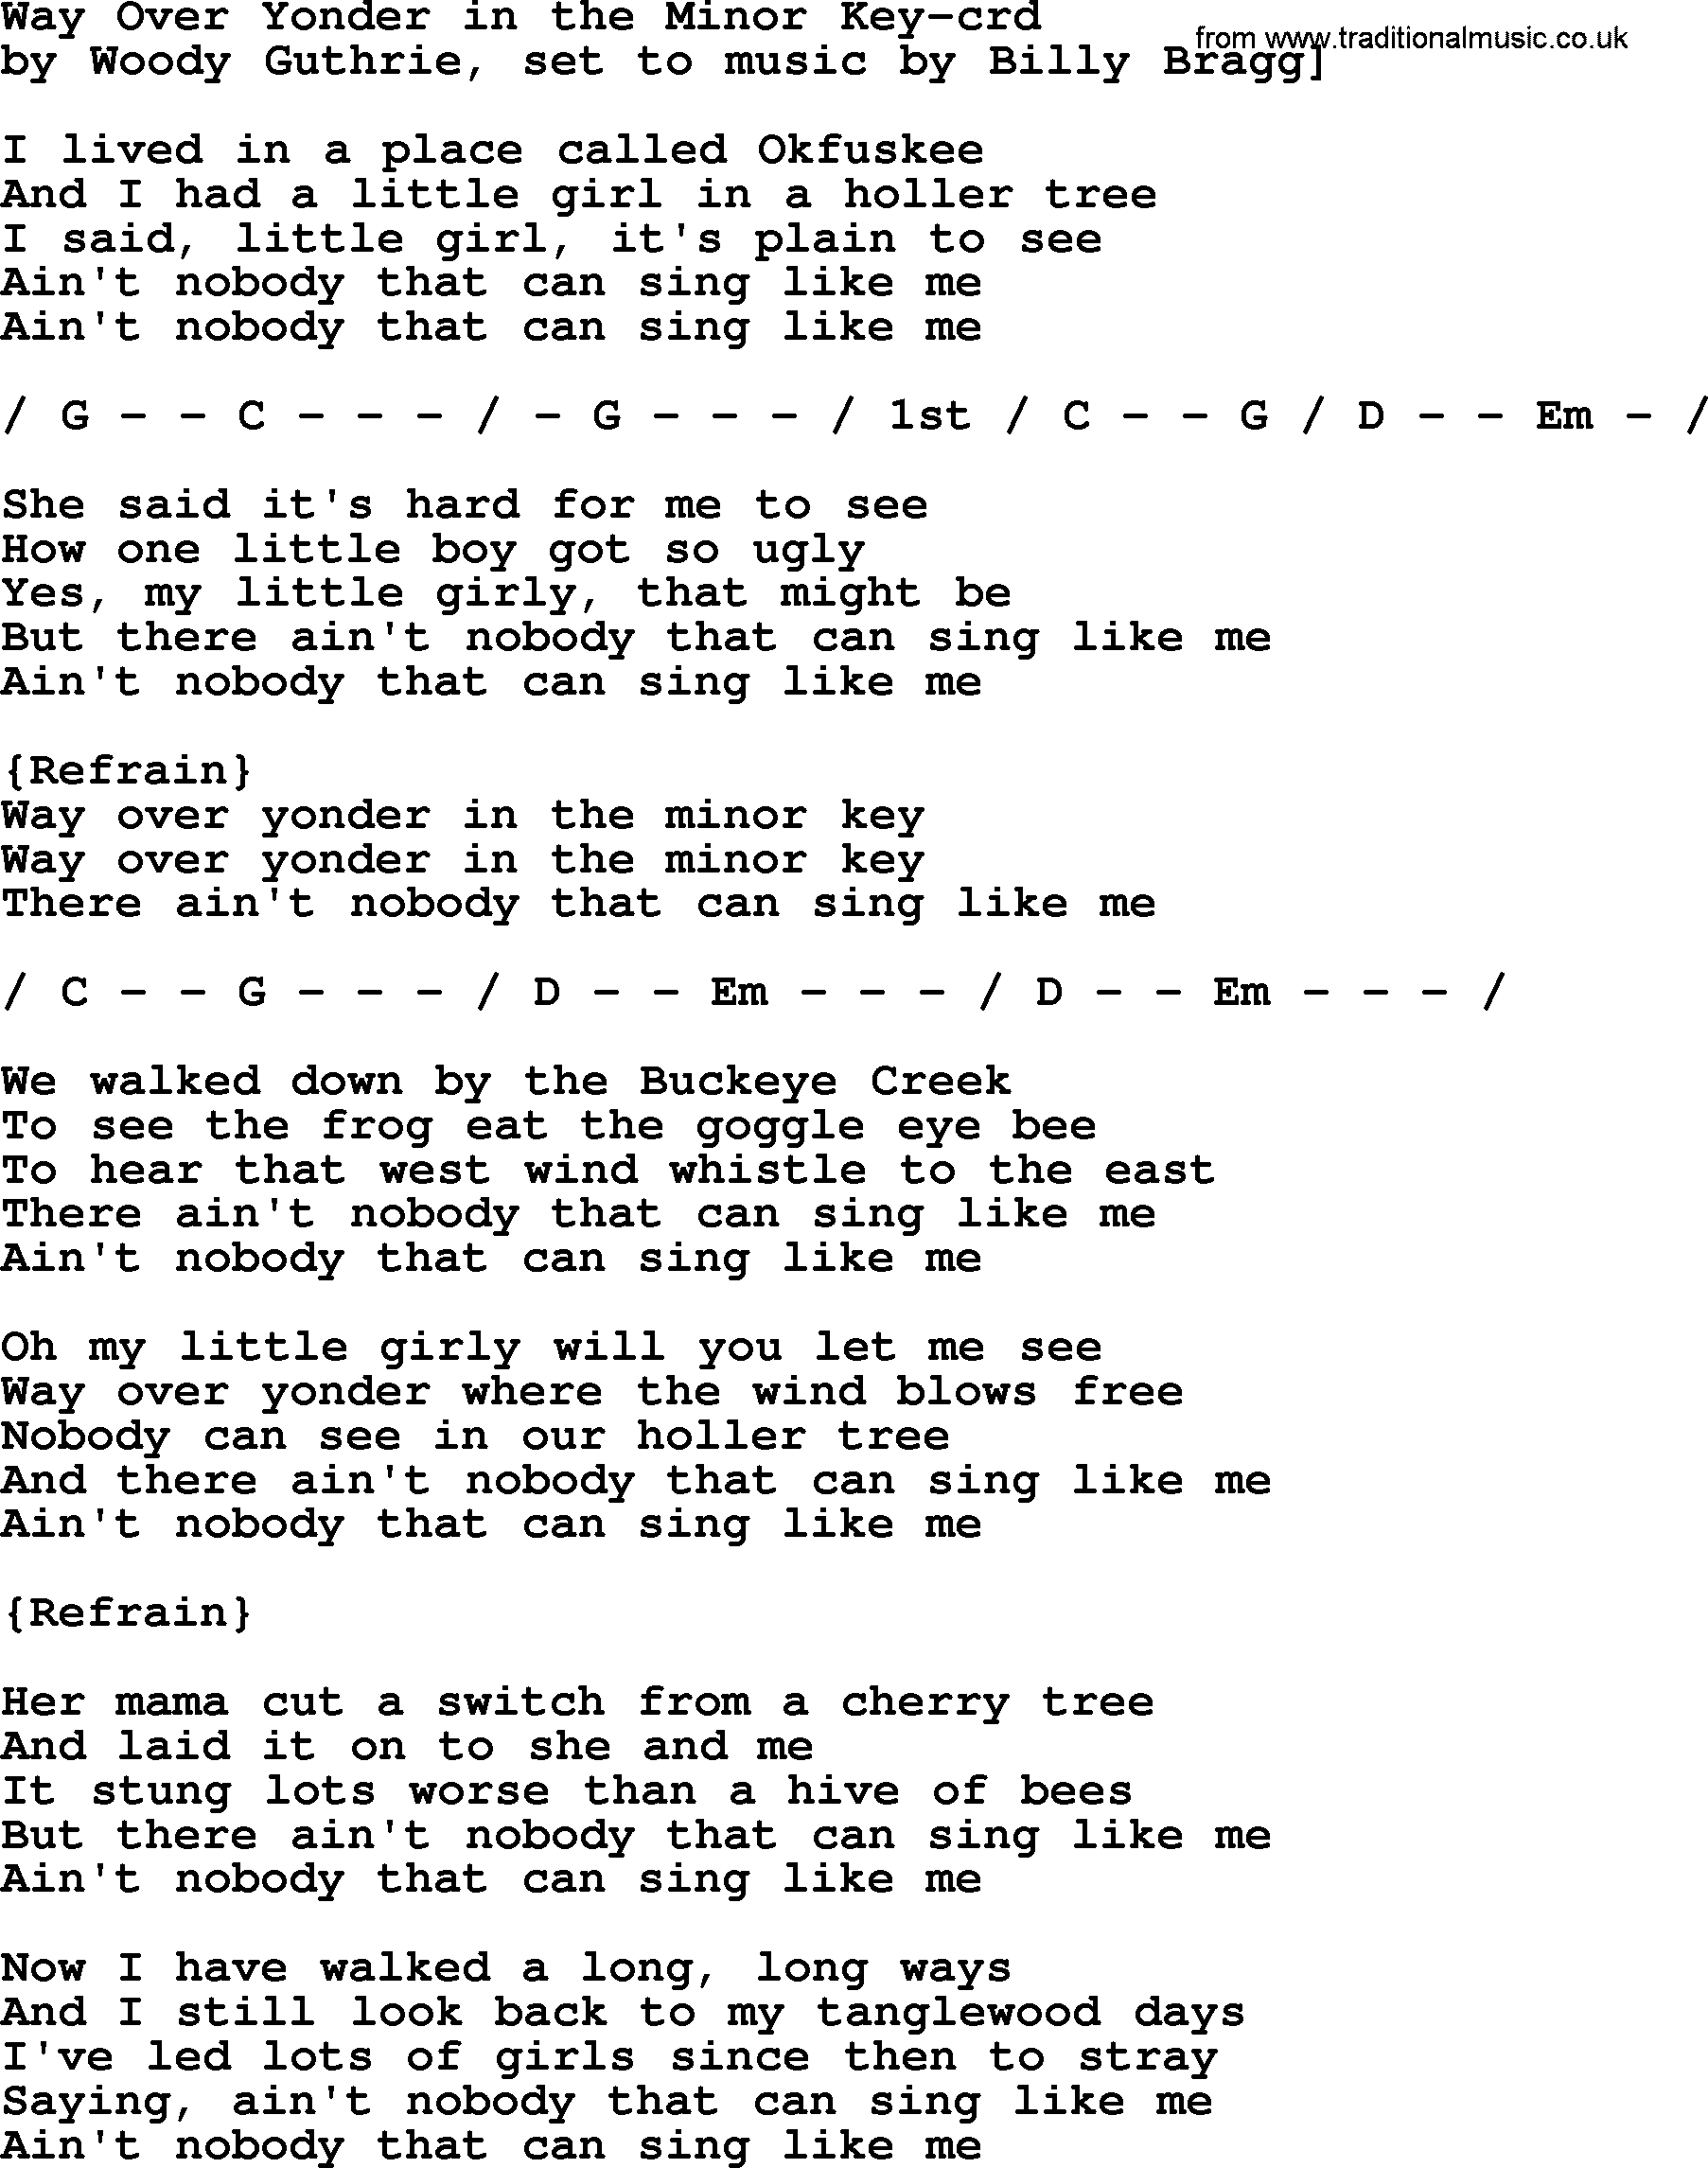 Woody Guthrie song Way Over Yonder In The Minor Key lyrics and chords